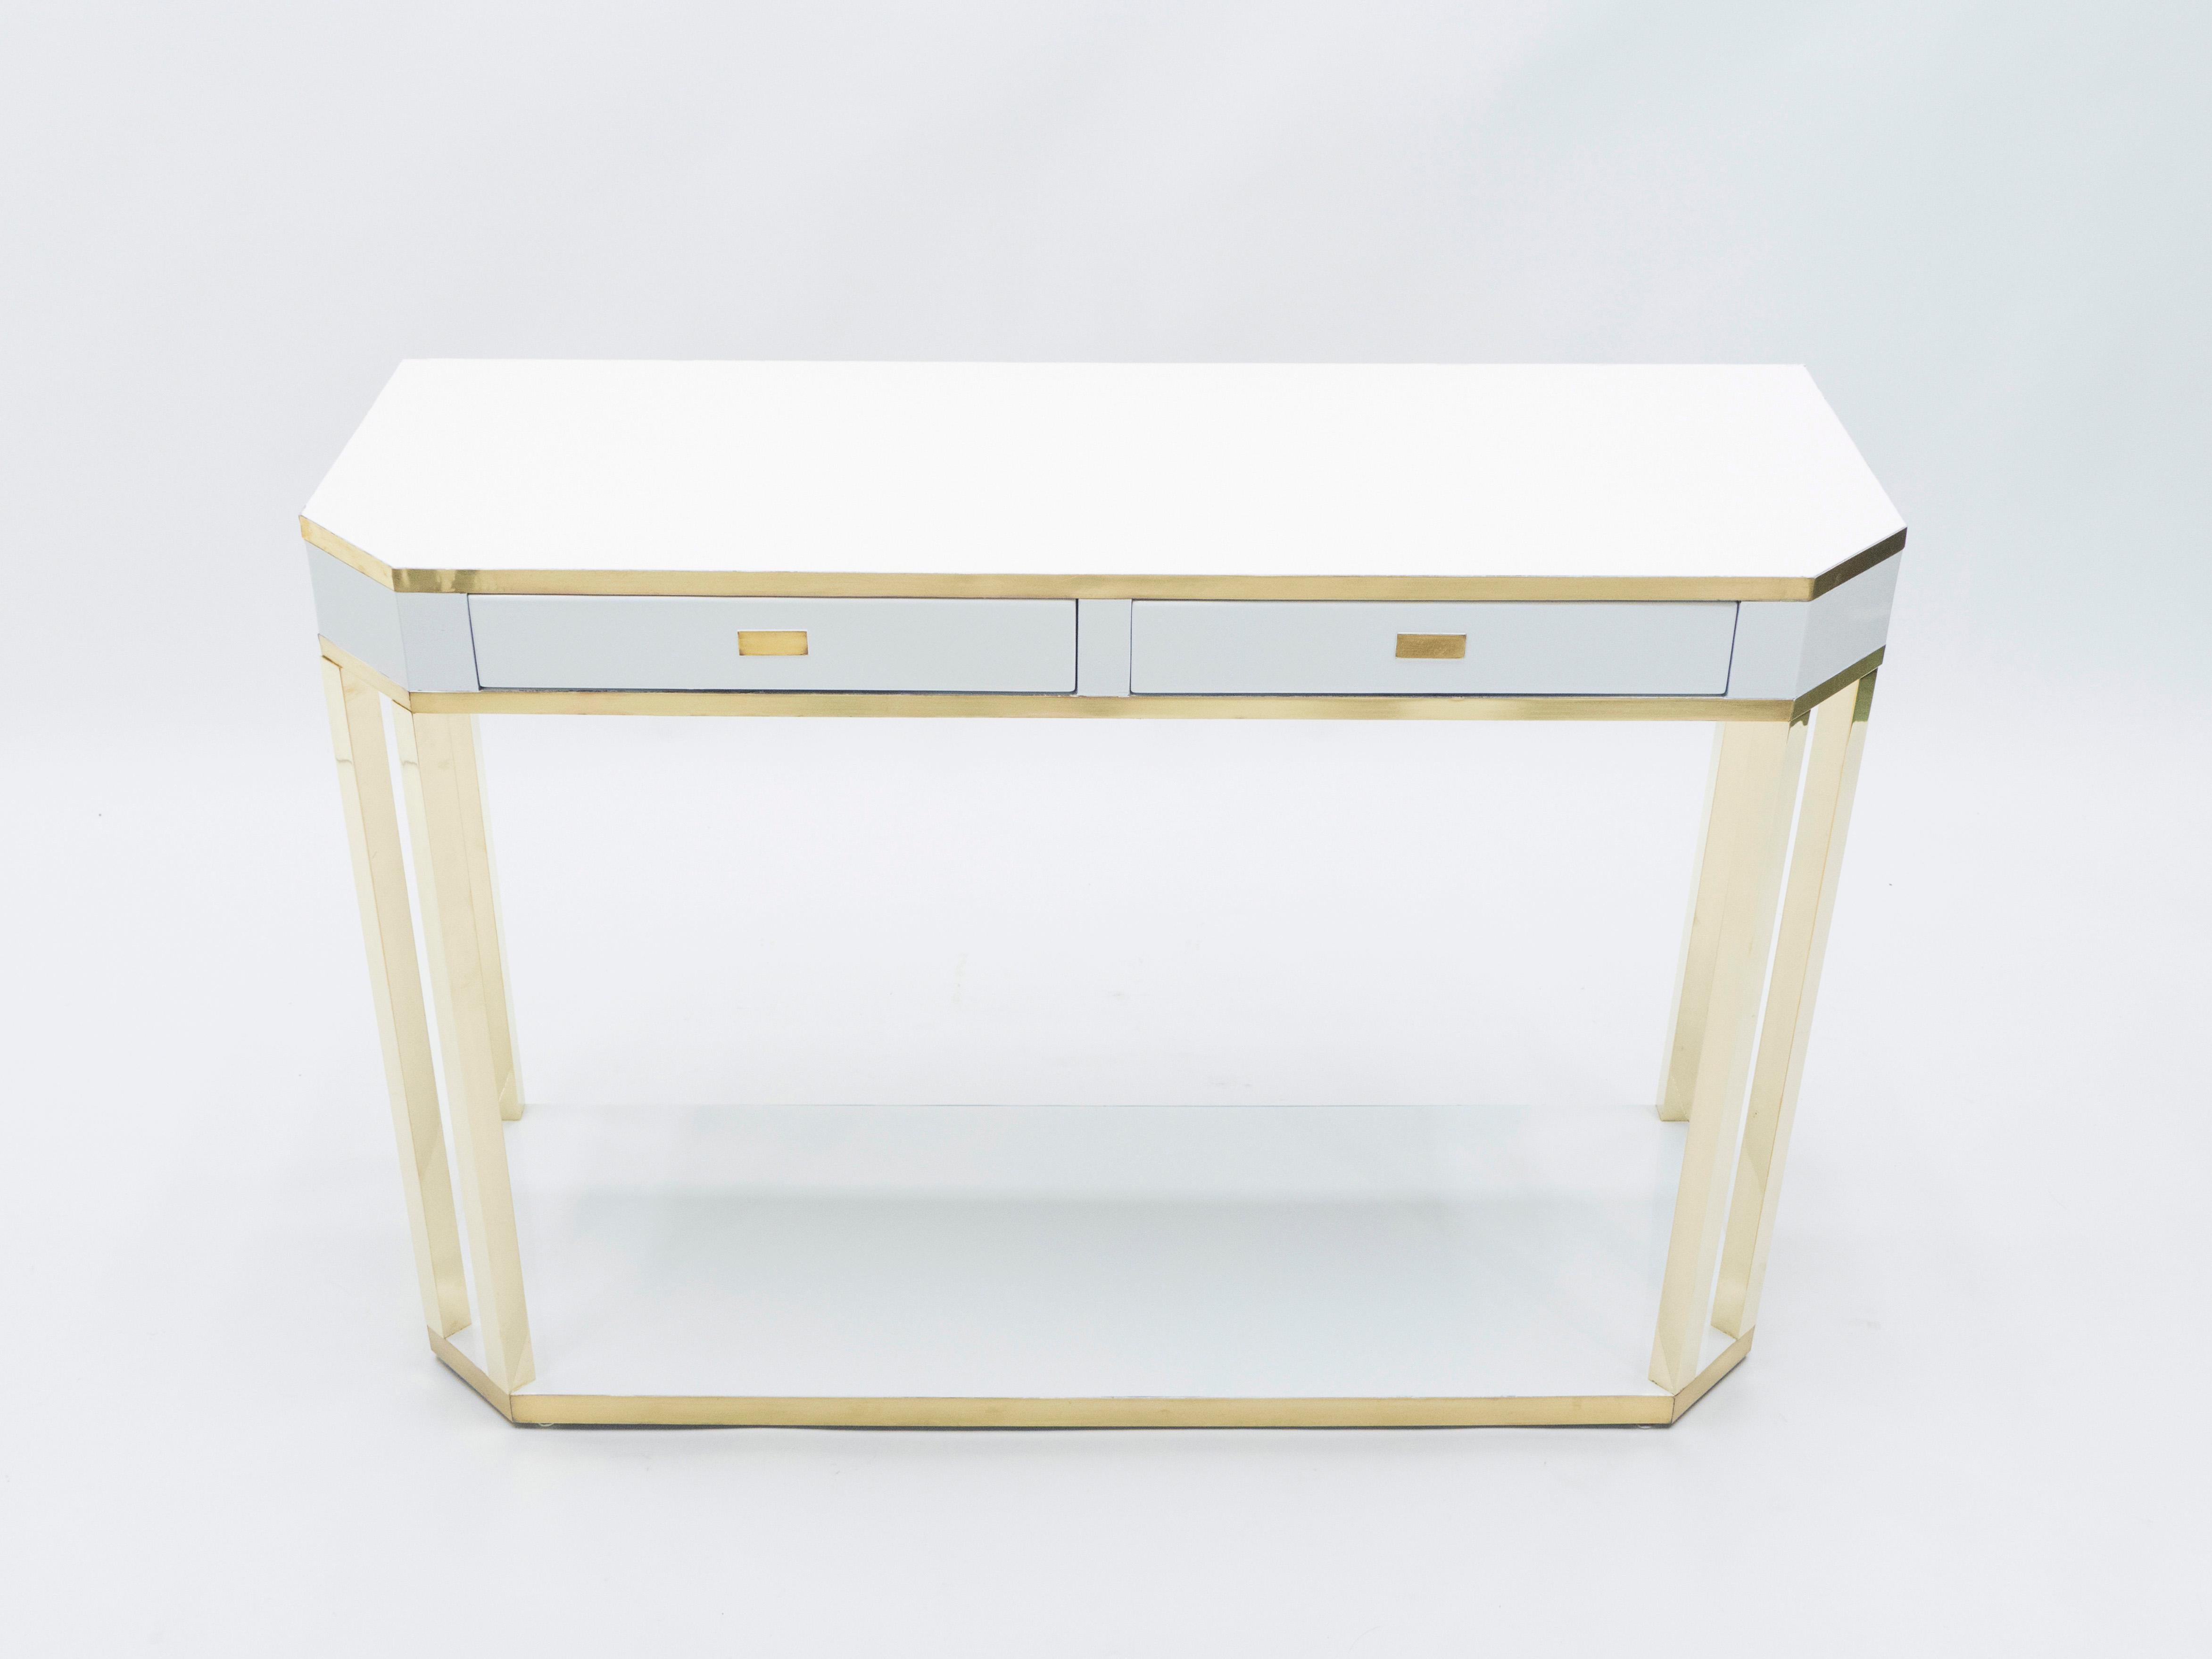 With a shining white lacquered top, and sharply geometric brass legs and details, this console table carries a stellar futuristic midcentury aesthetic into the contemporary home. Its boxy yet sophisticated style is typical of both the 1970s and